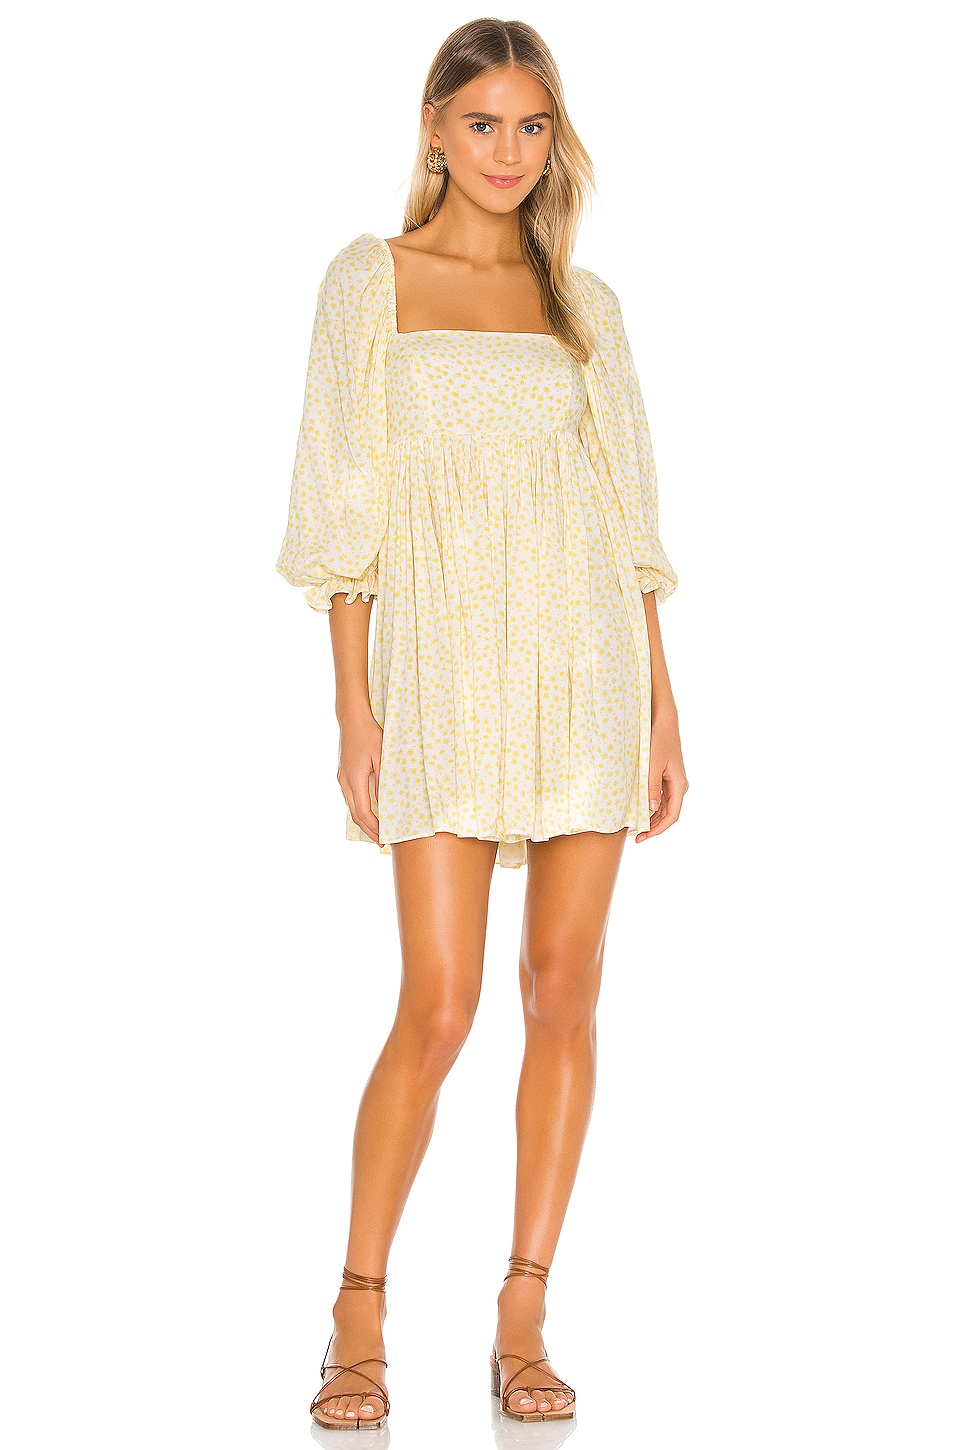 Selkie The Puff Dress in Buttercup | REVOLVE